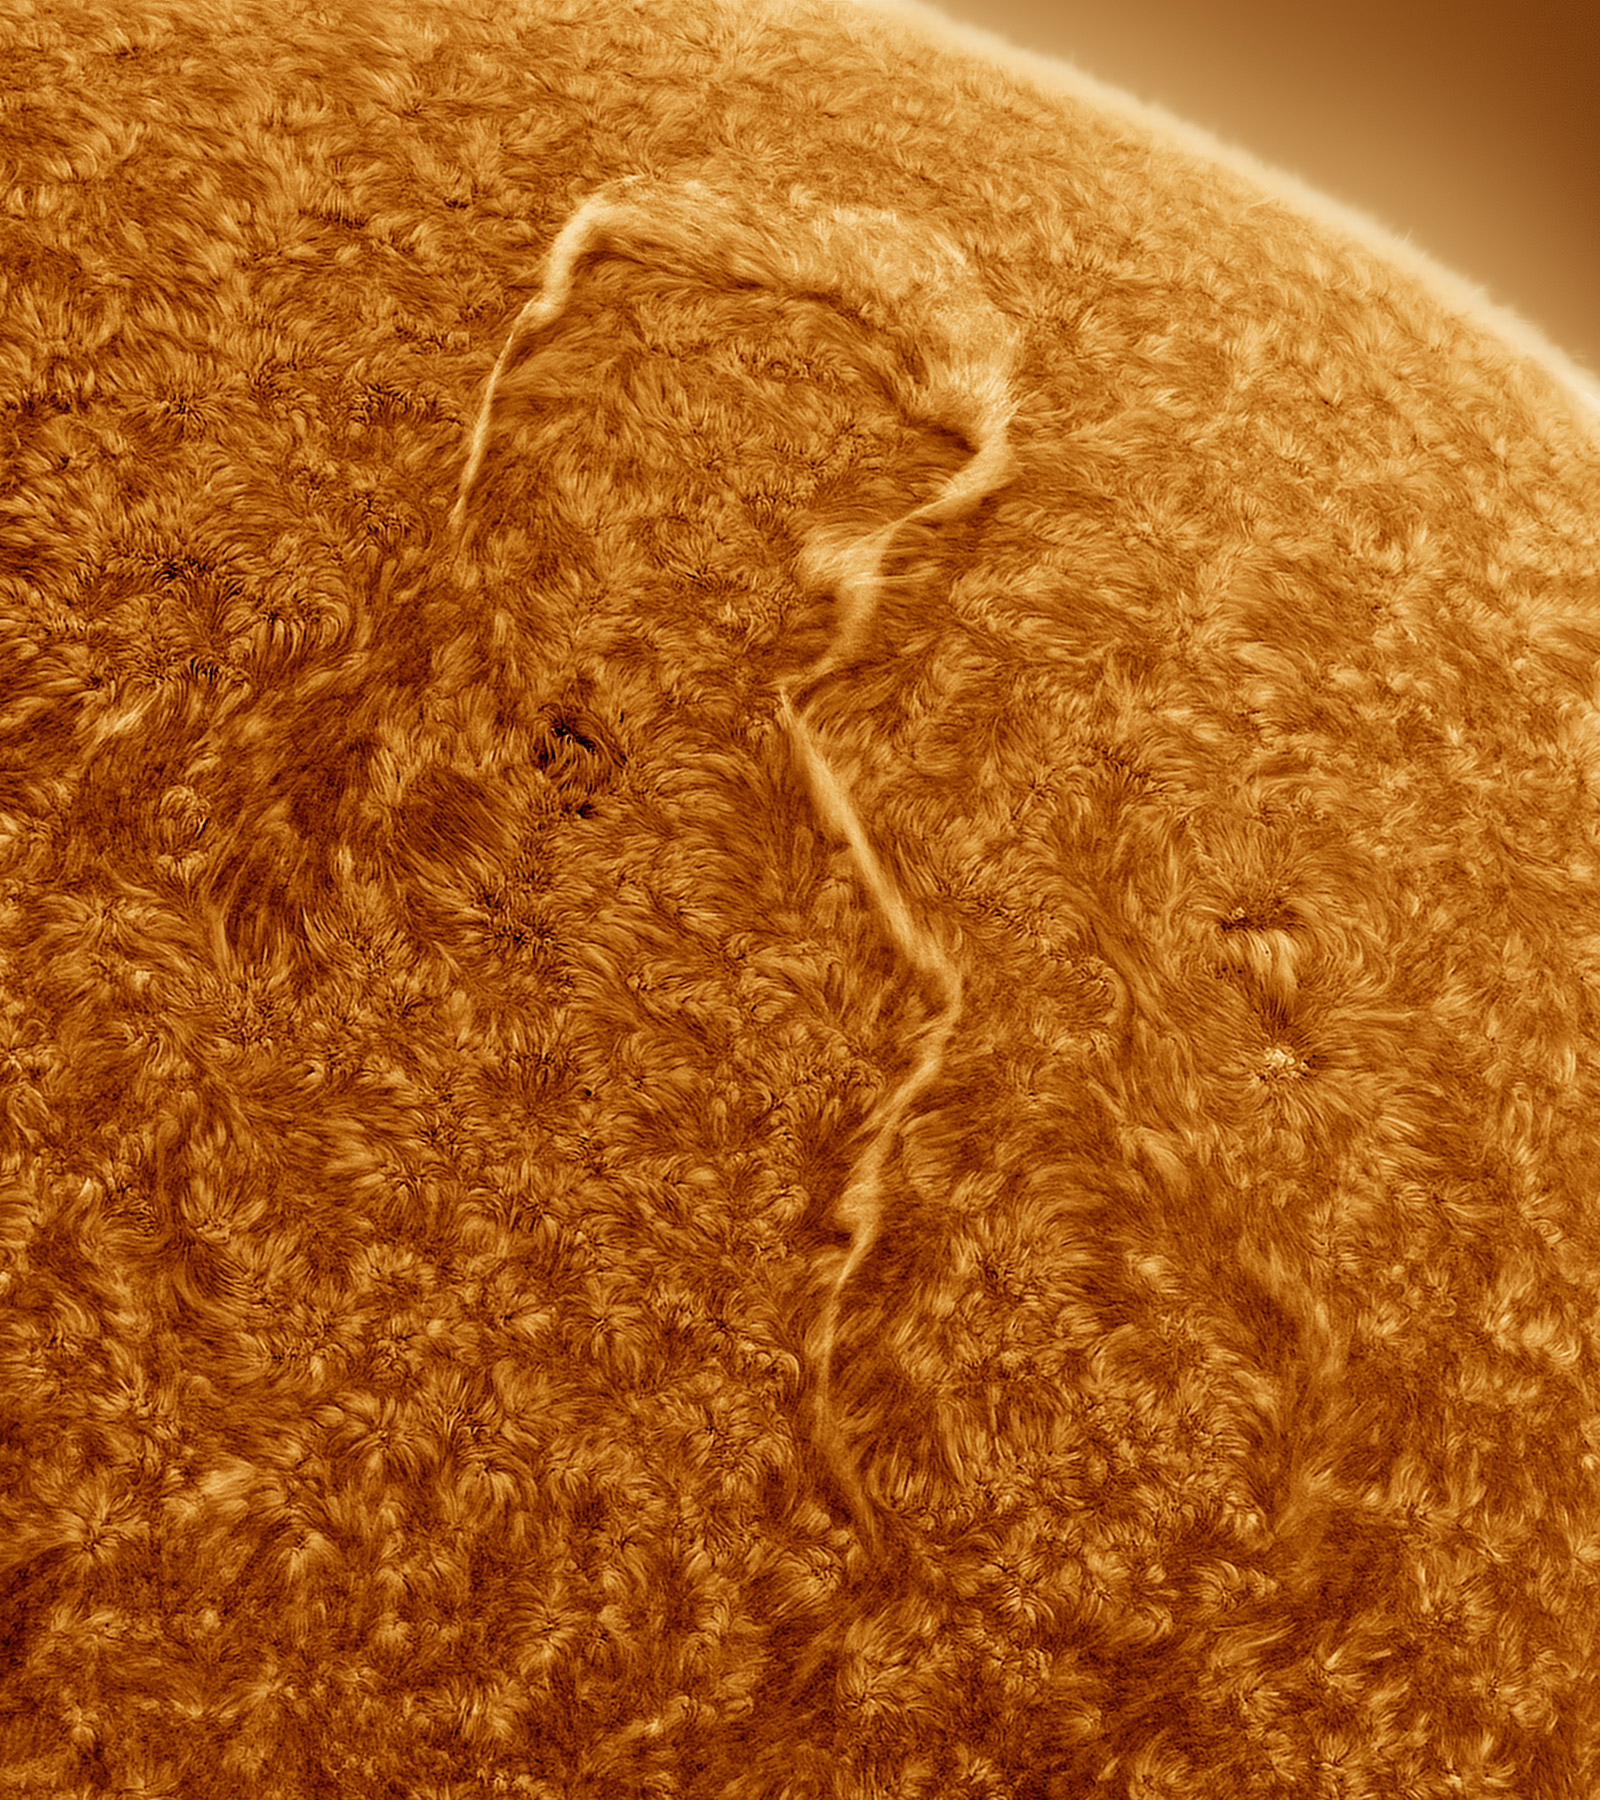 A question mark-like structure on the Sun